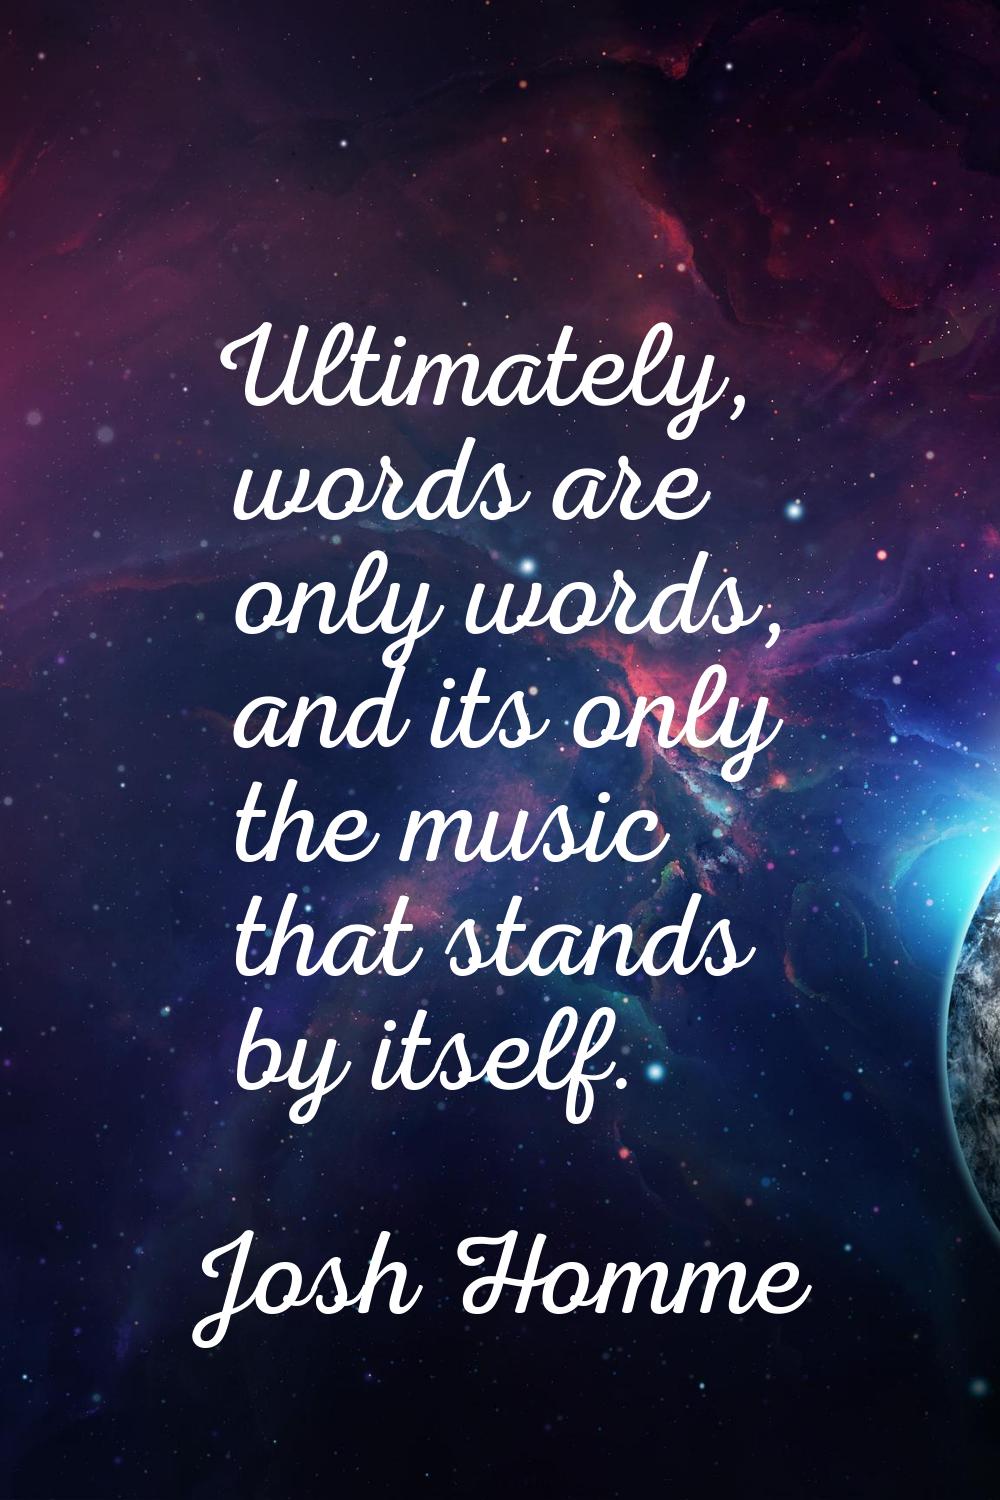 Ultimately, words are only words, and its only the music that stands by itself.